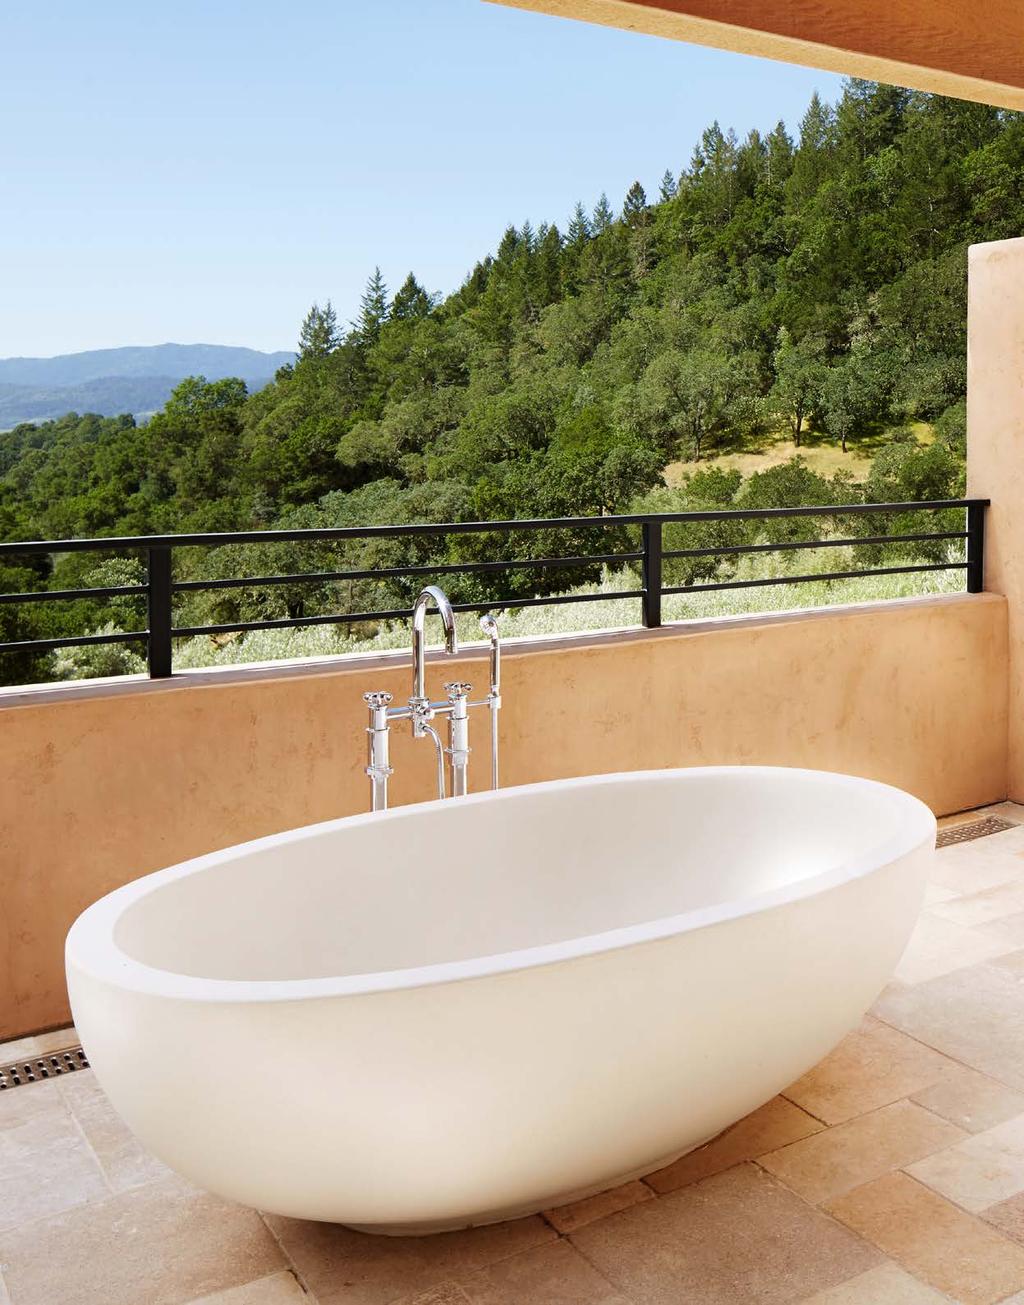 Bathtubs Napali 60 in L x 42 in W x 25 in H Vegas 70 in L x 40 in W x 22 in H Barcelona 72 in L x 42 in W x 22 in H Vegas Tub / Linen The Napali Tub design is inspired by the upright, compact style